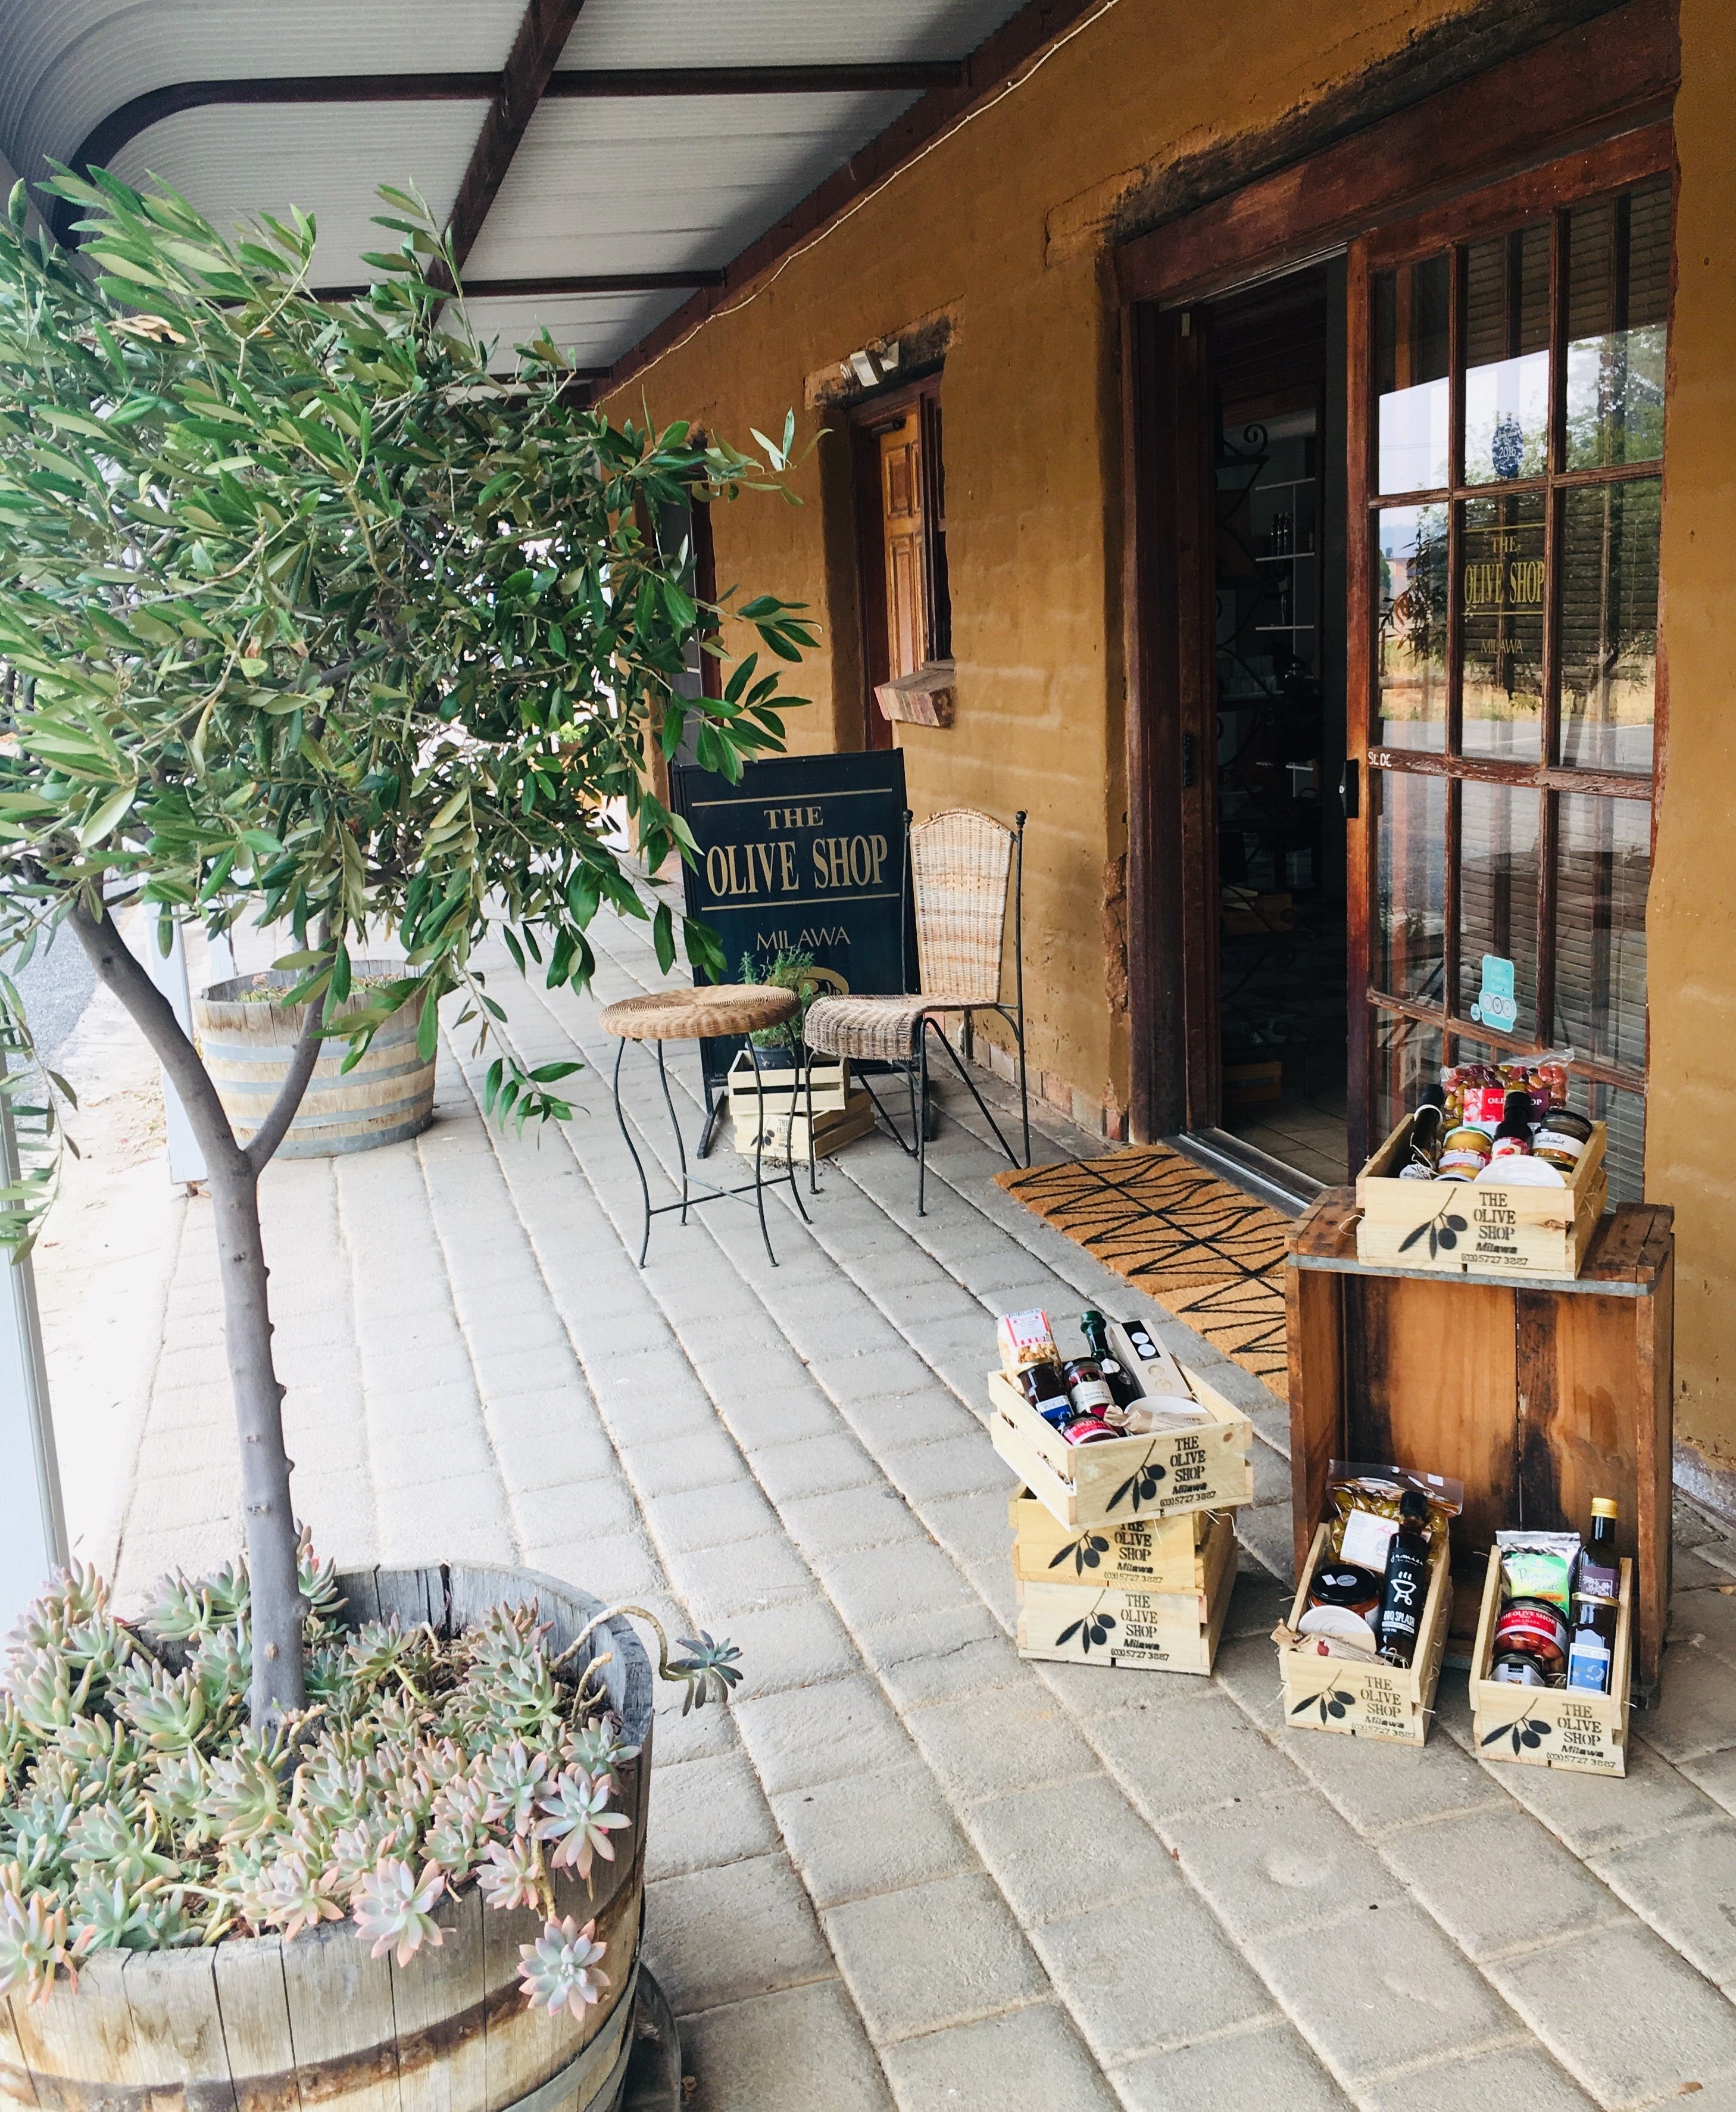 The Olive Shop - Milawa - New South Wales Tourism 